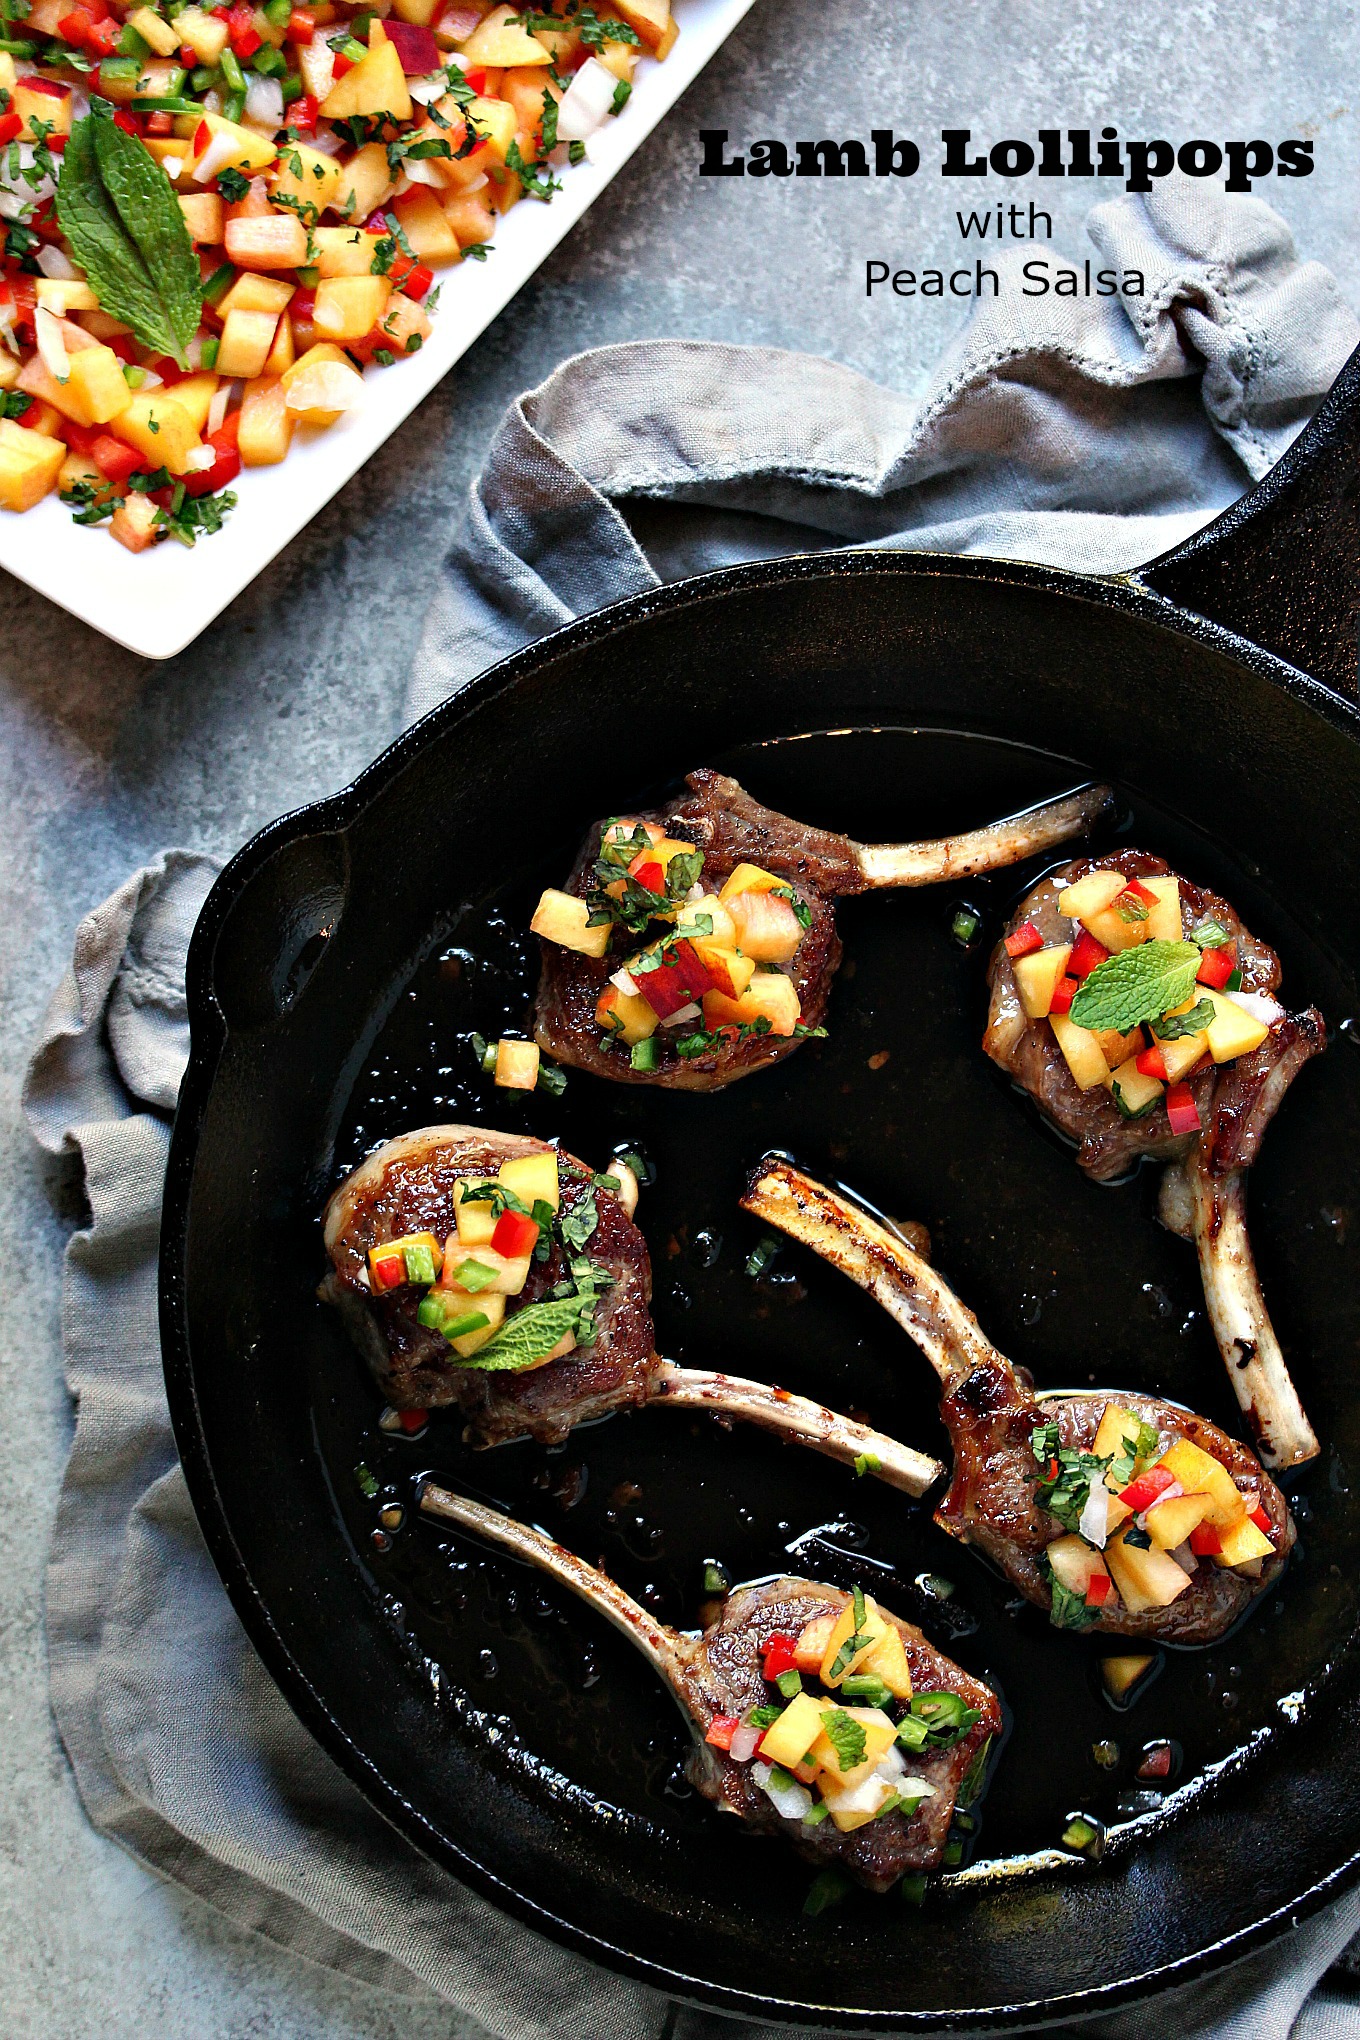 Lamb Lollipops with Peach Salsa - This lamb lollipop recipe is quick and easy, yet packed with flavour. The lamb is seared, then topped with an easy peach salsa recipe. A stunning meal on the table in under 20 minutes.